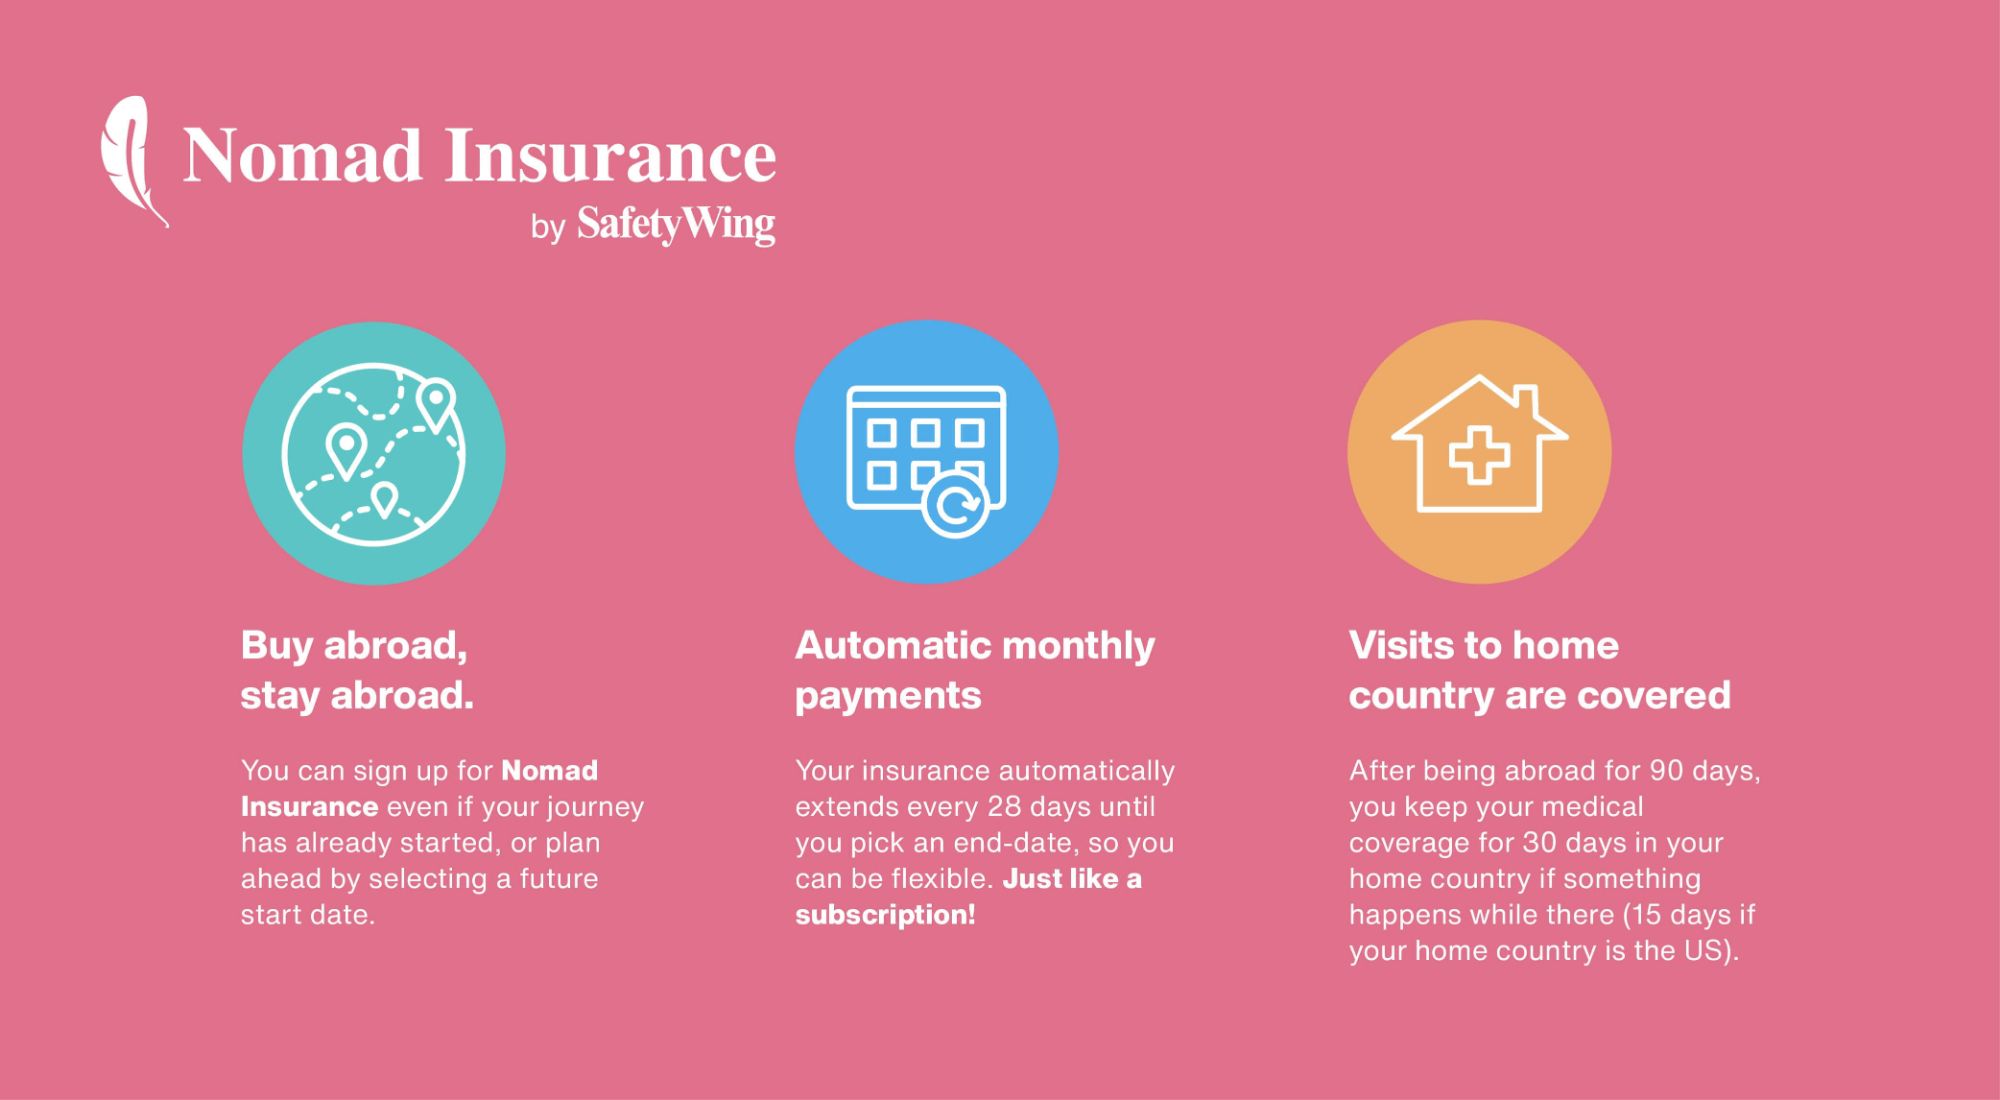 SafetyWing Affiliate Nomad Insurance 3